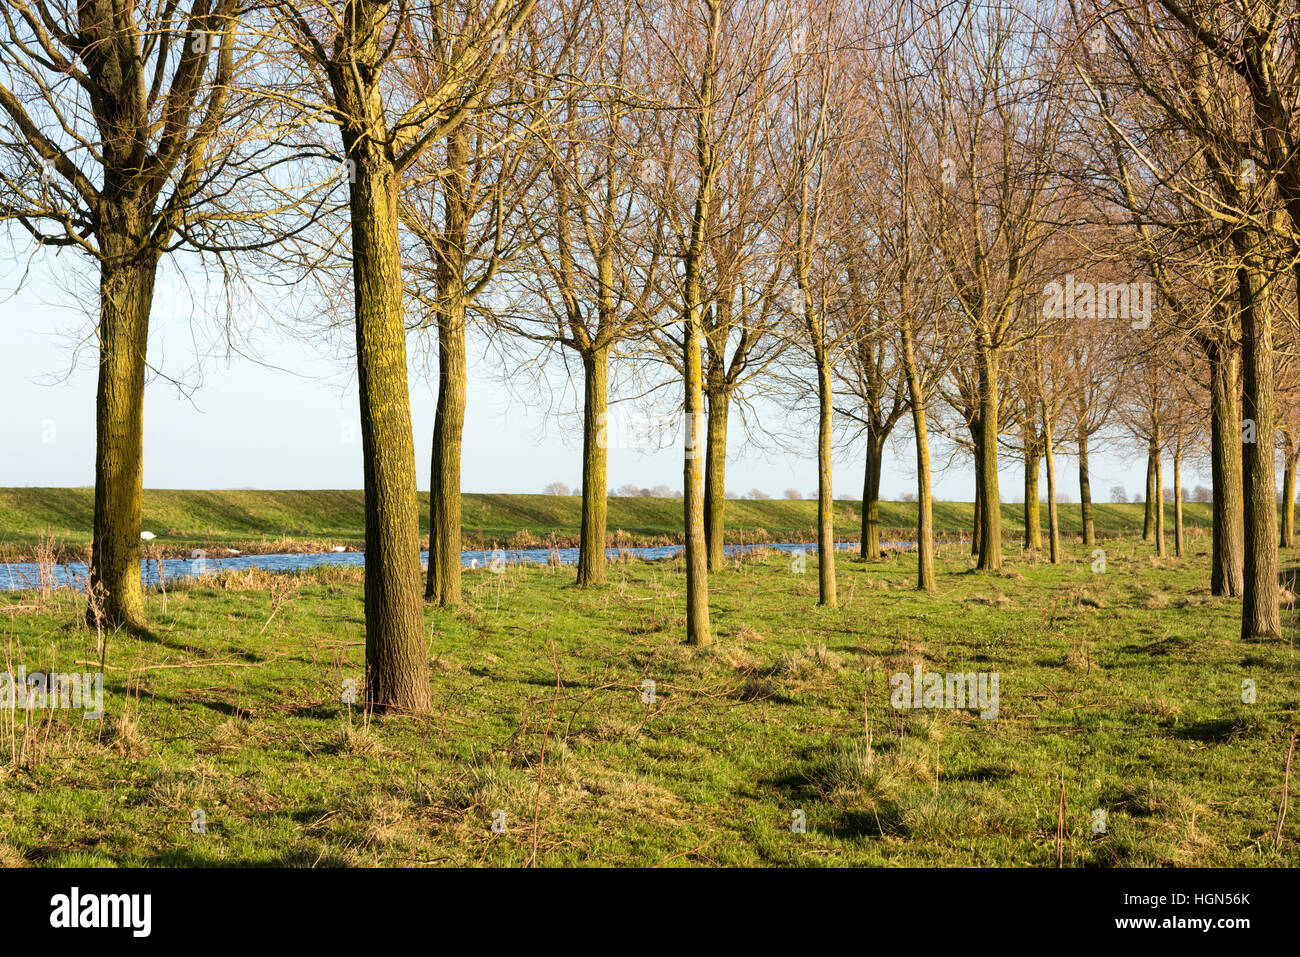 Willow trees grown to make cricket bats growing at the side of the Old West  River Cambridgeshire UK Stock Photo - Alamy